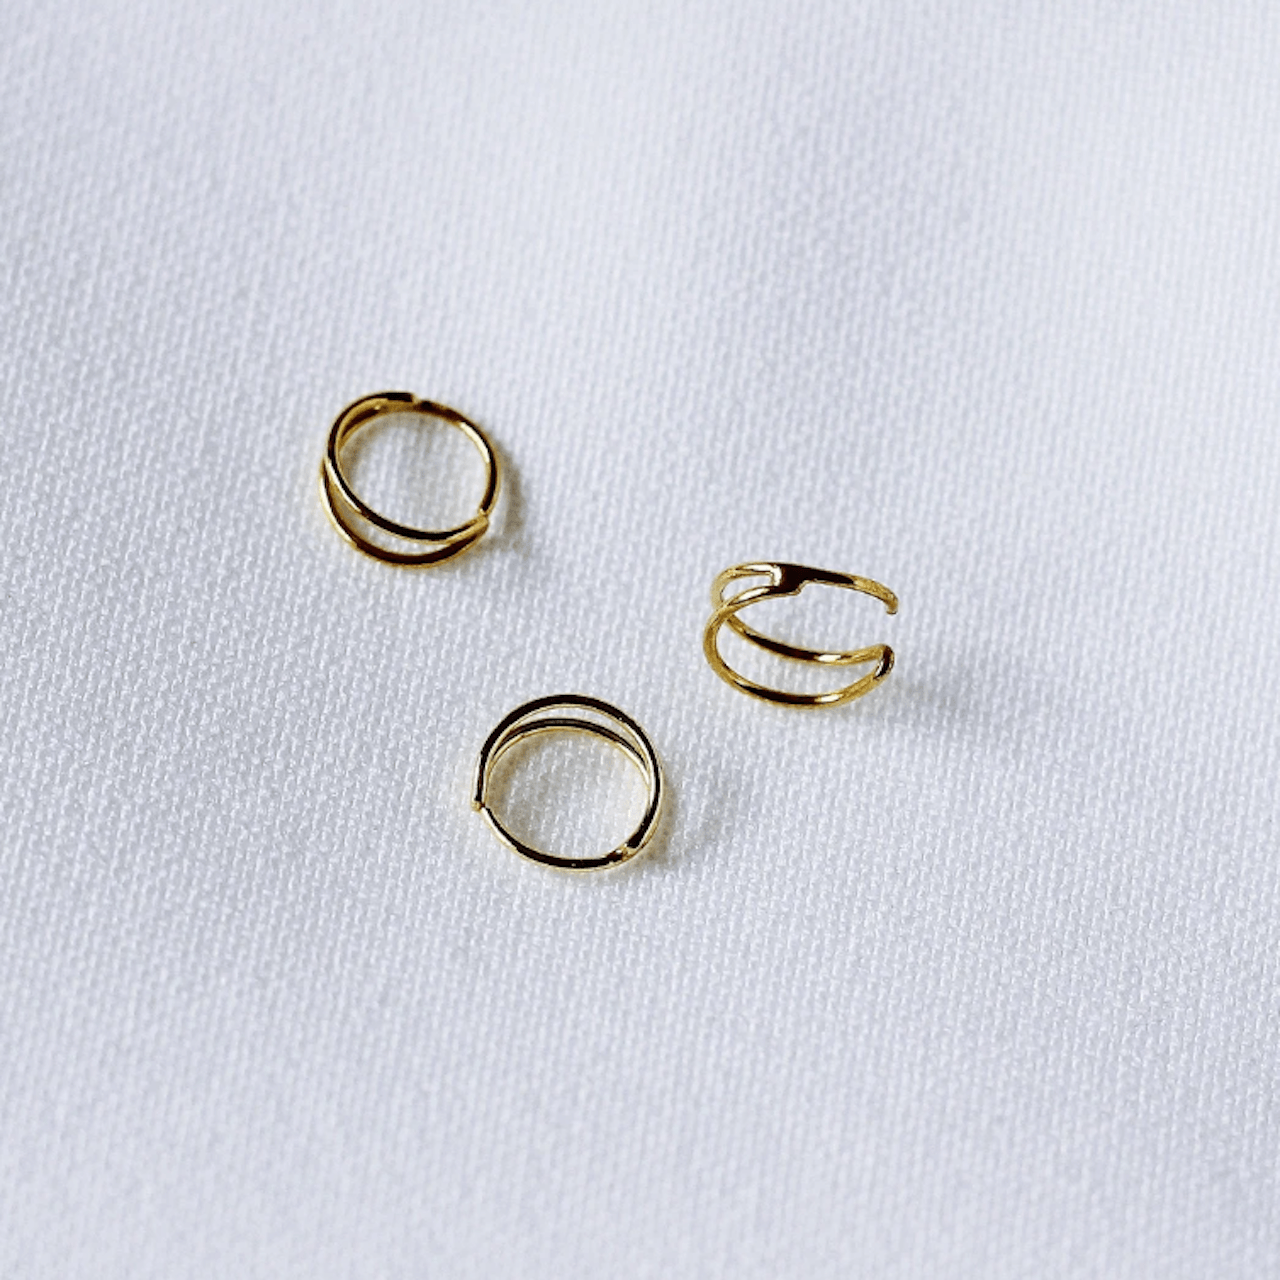 Double Hoop Tragus Earring Gold - TinyBox Jewelry